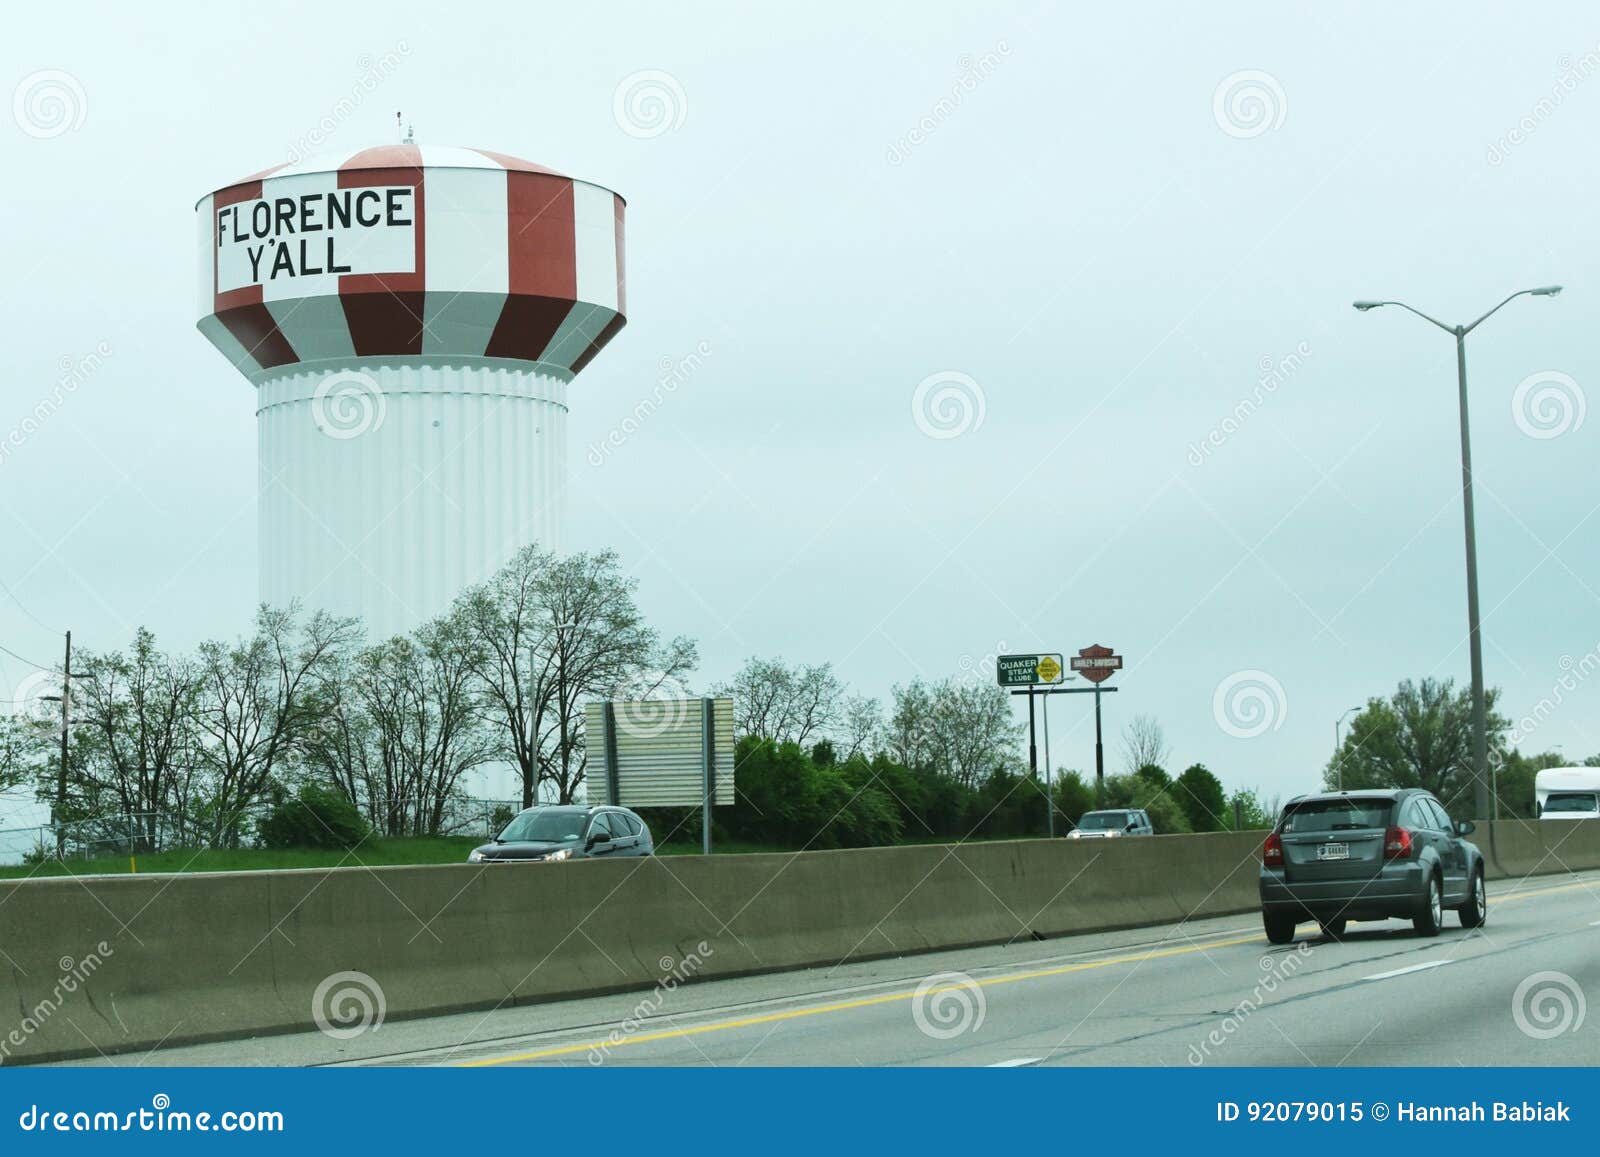 Florence Water Tower in Kentucky Editorial Image - Image of yall, driving:  92079015